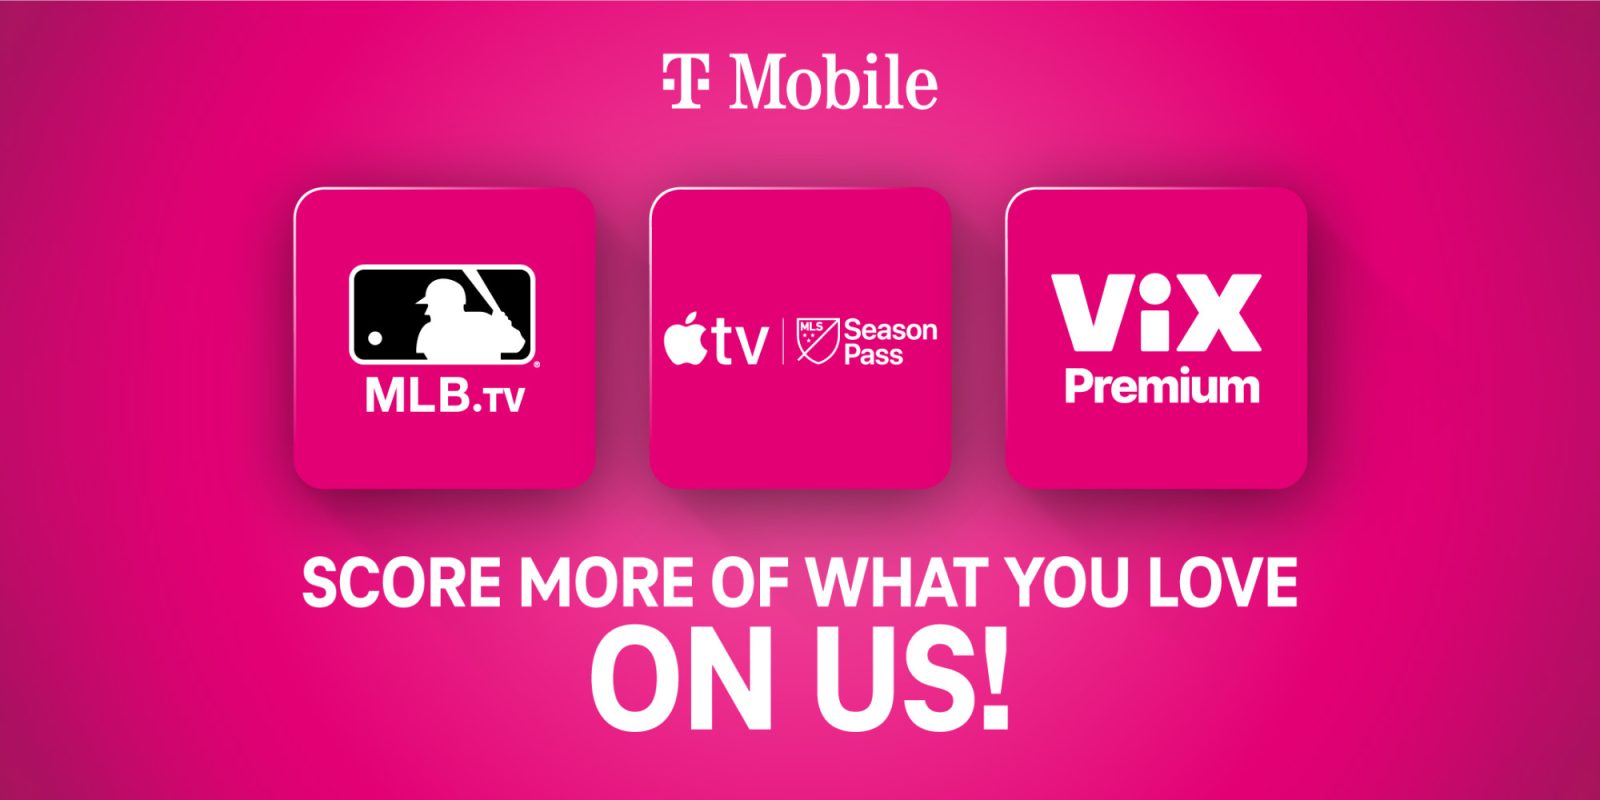 MLB.TV Free Trial Offer 2023: Free Subscription, , T-Mobile Deal